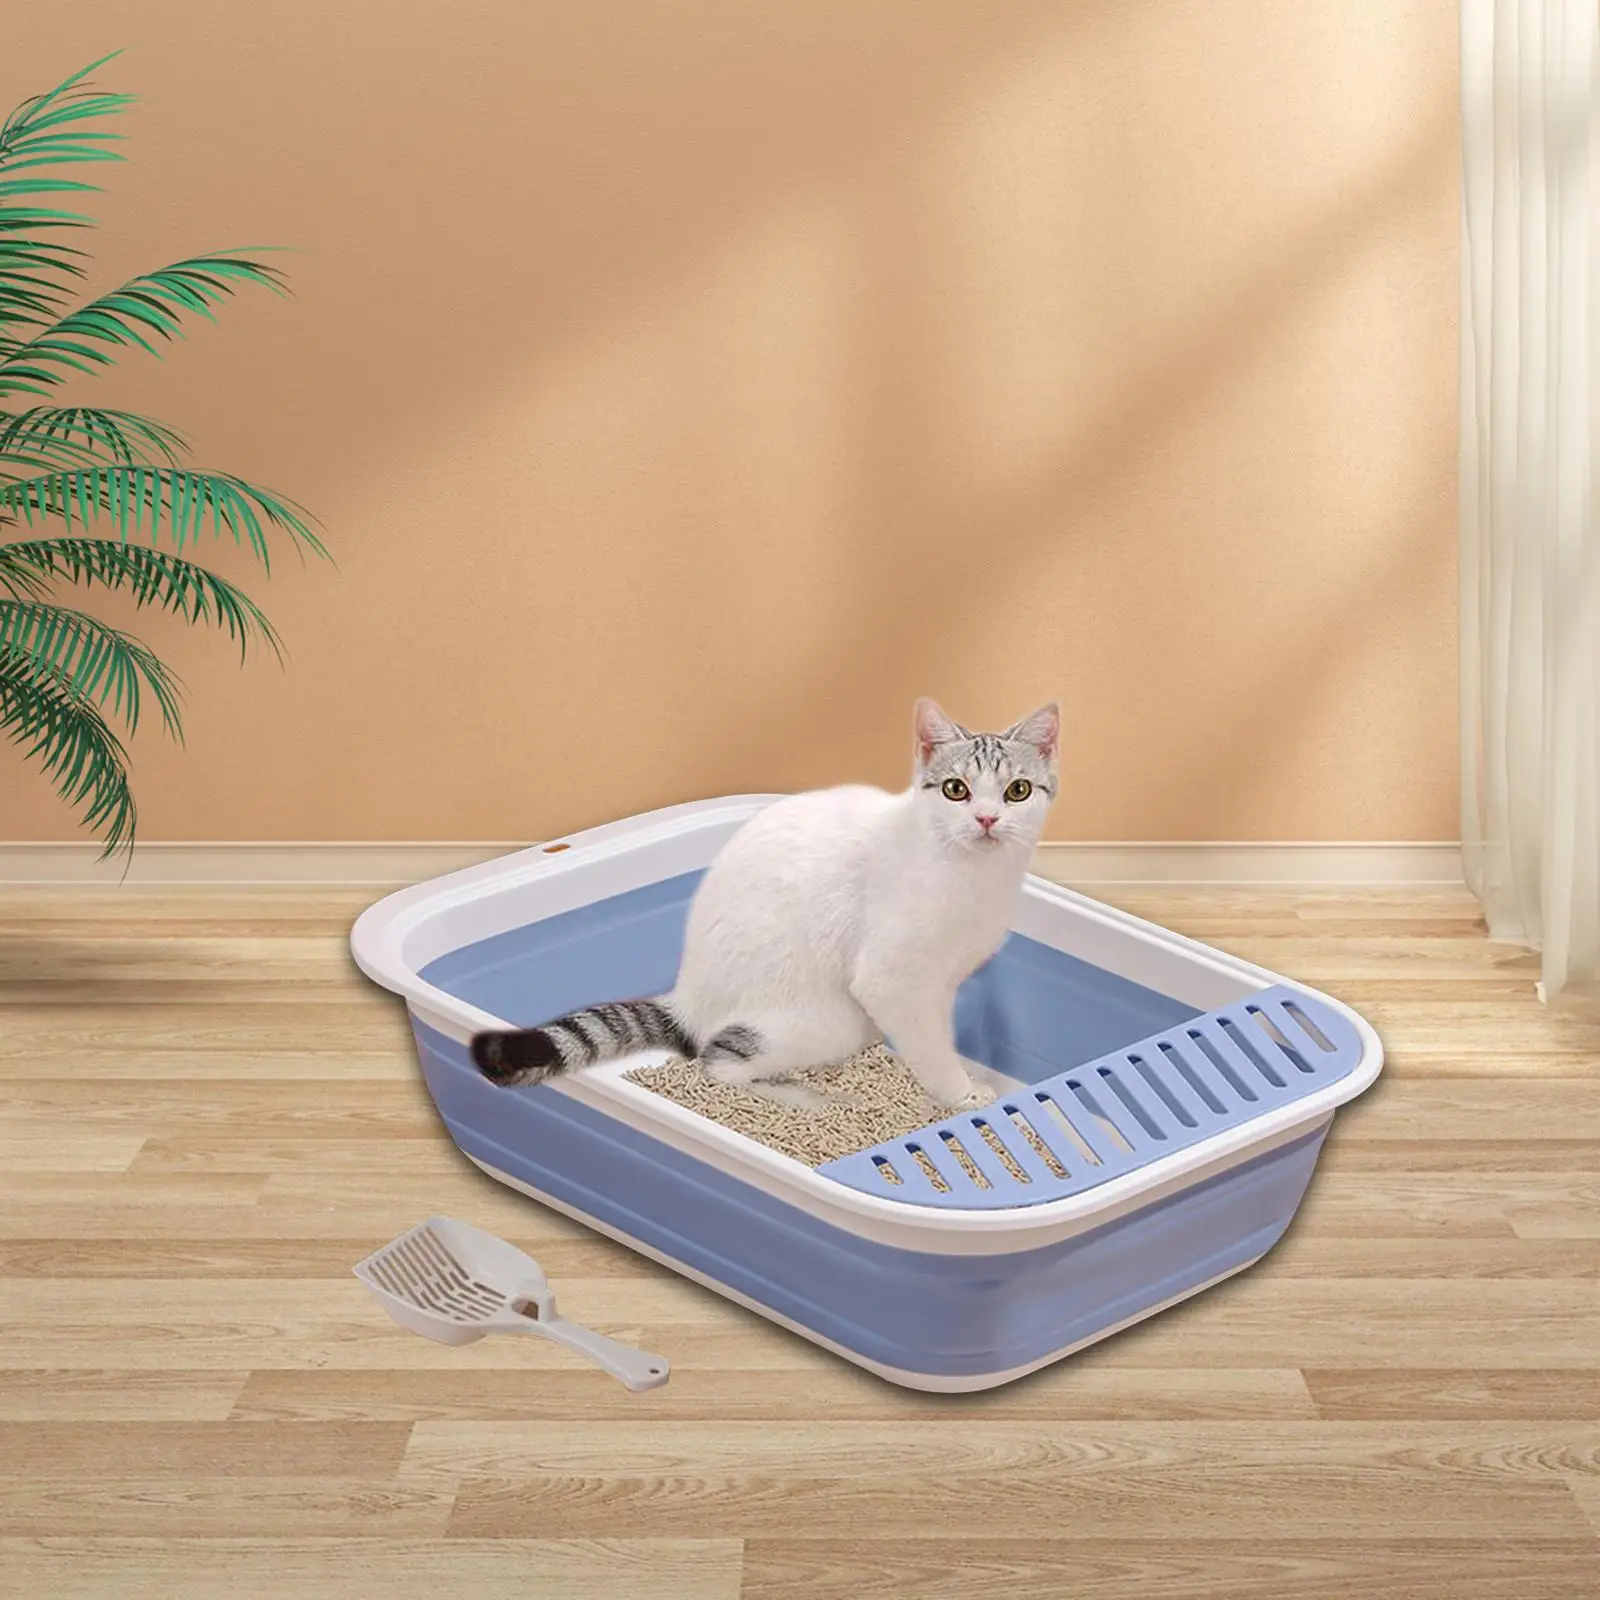 Cat Litter Box Foldable Sturdy Open Top Pet Litter Tray for All Kinds of Cat Litter Small Animals Rabbit Easy to Clean, No Odor